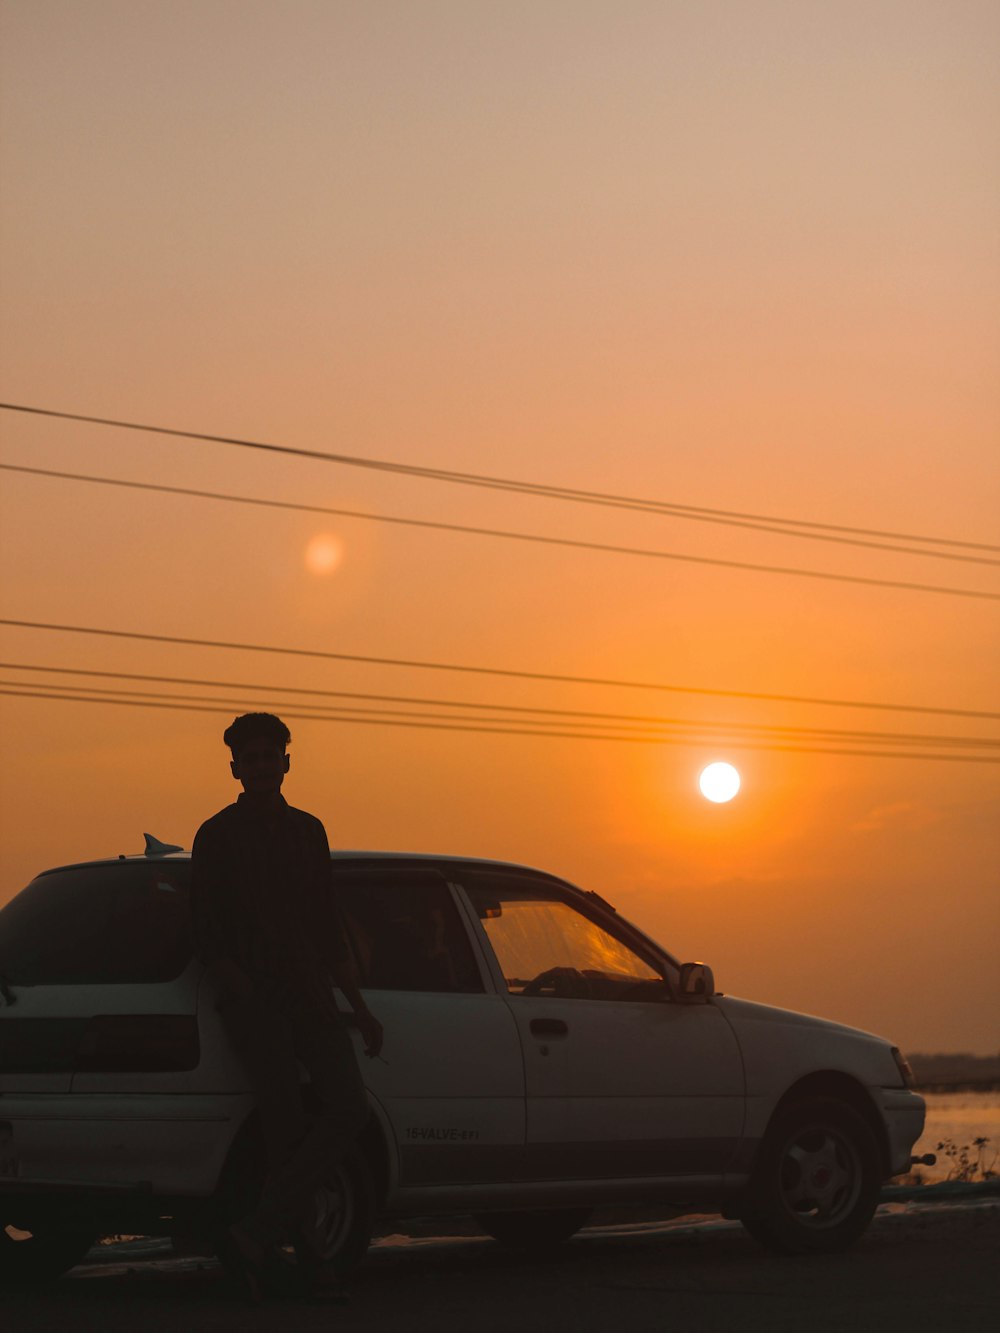 silhouette of man standing beside car during sunset